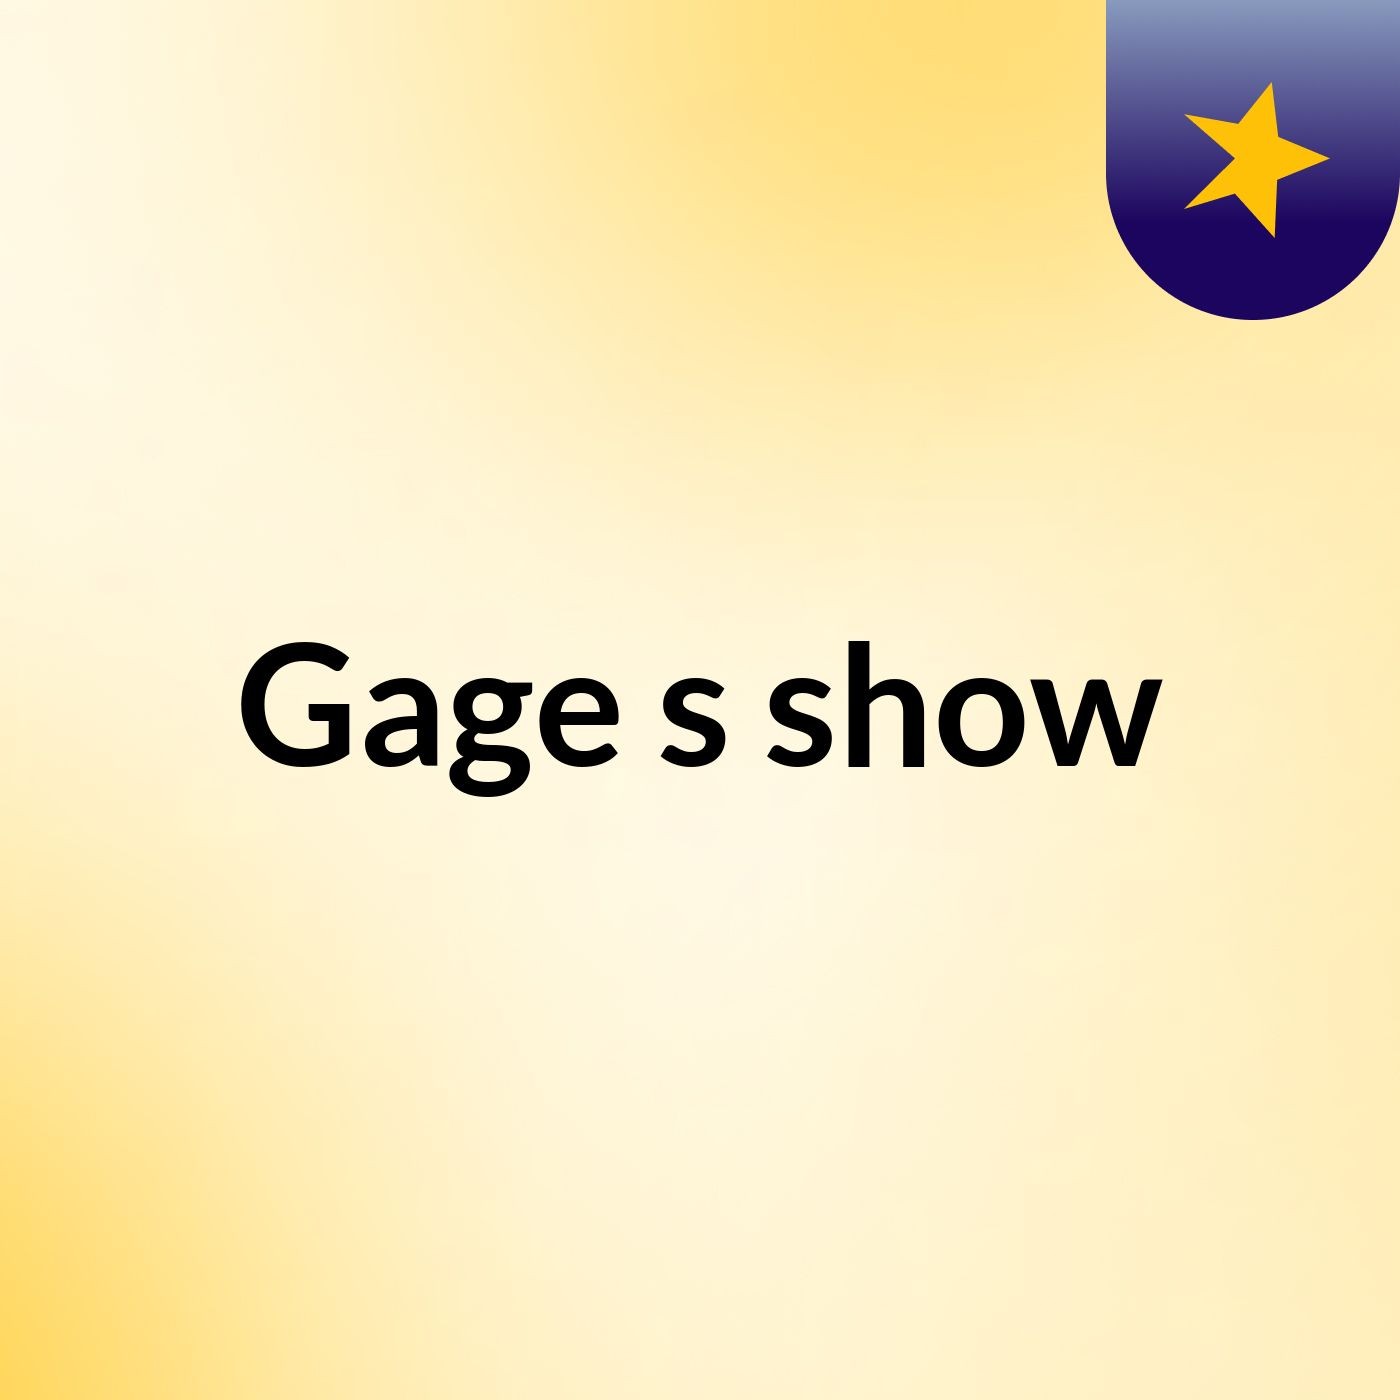 Gage's show